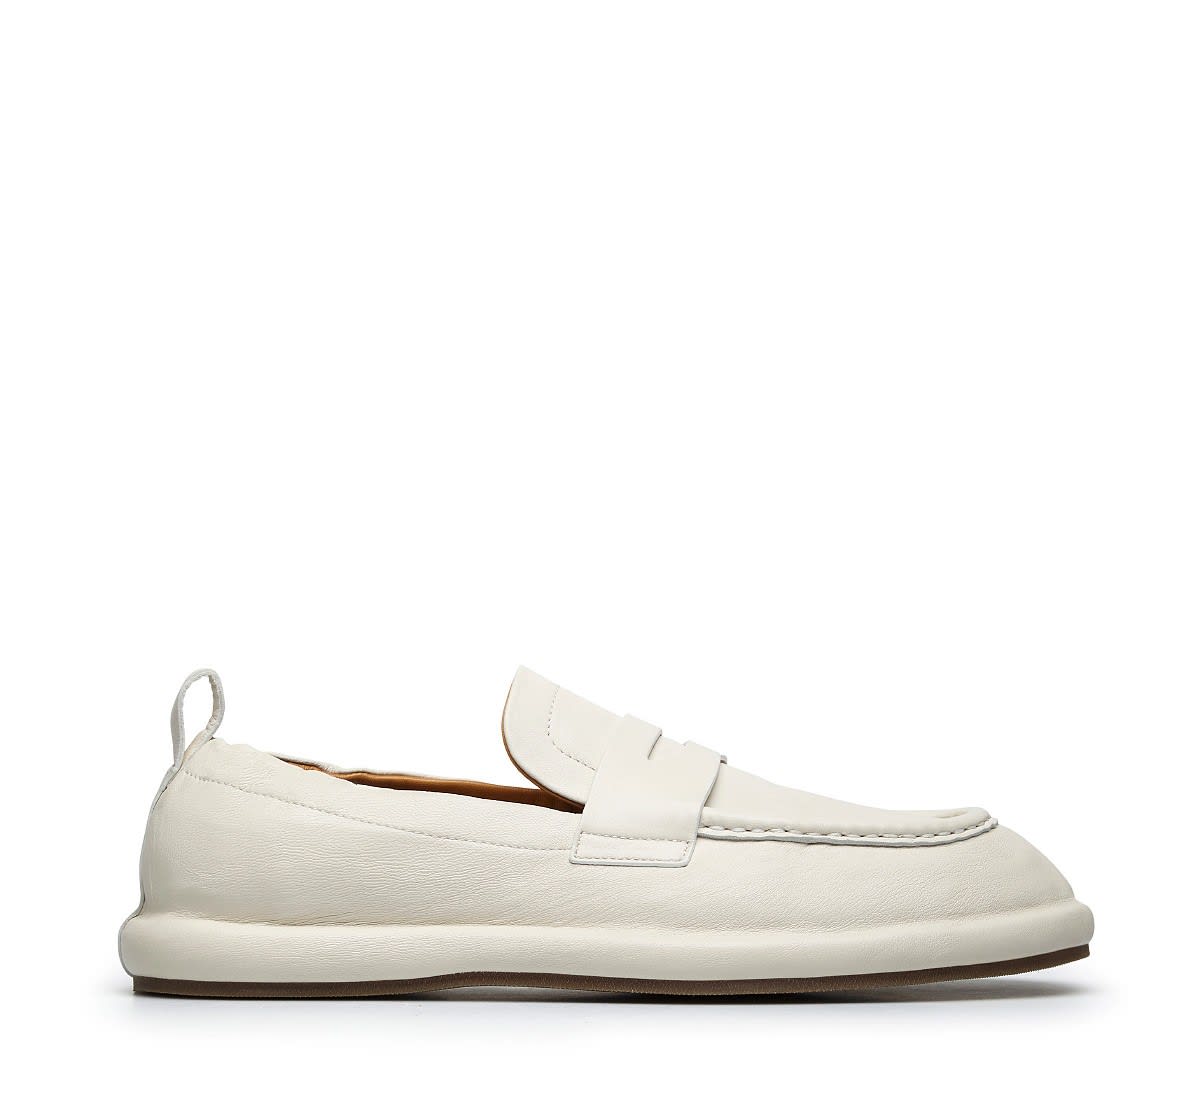 Barracuda Loafer In Bianco Sporco